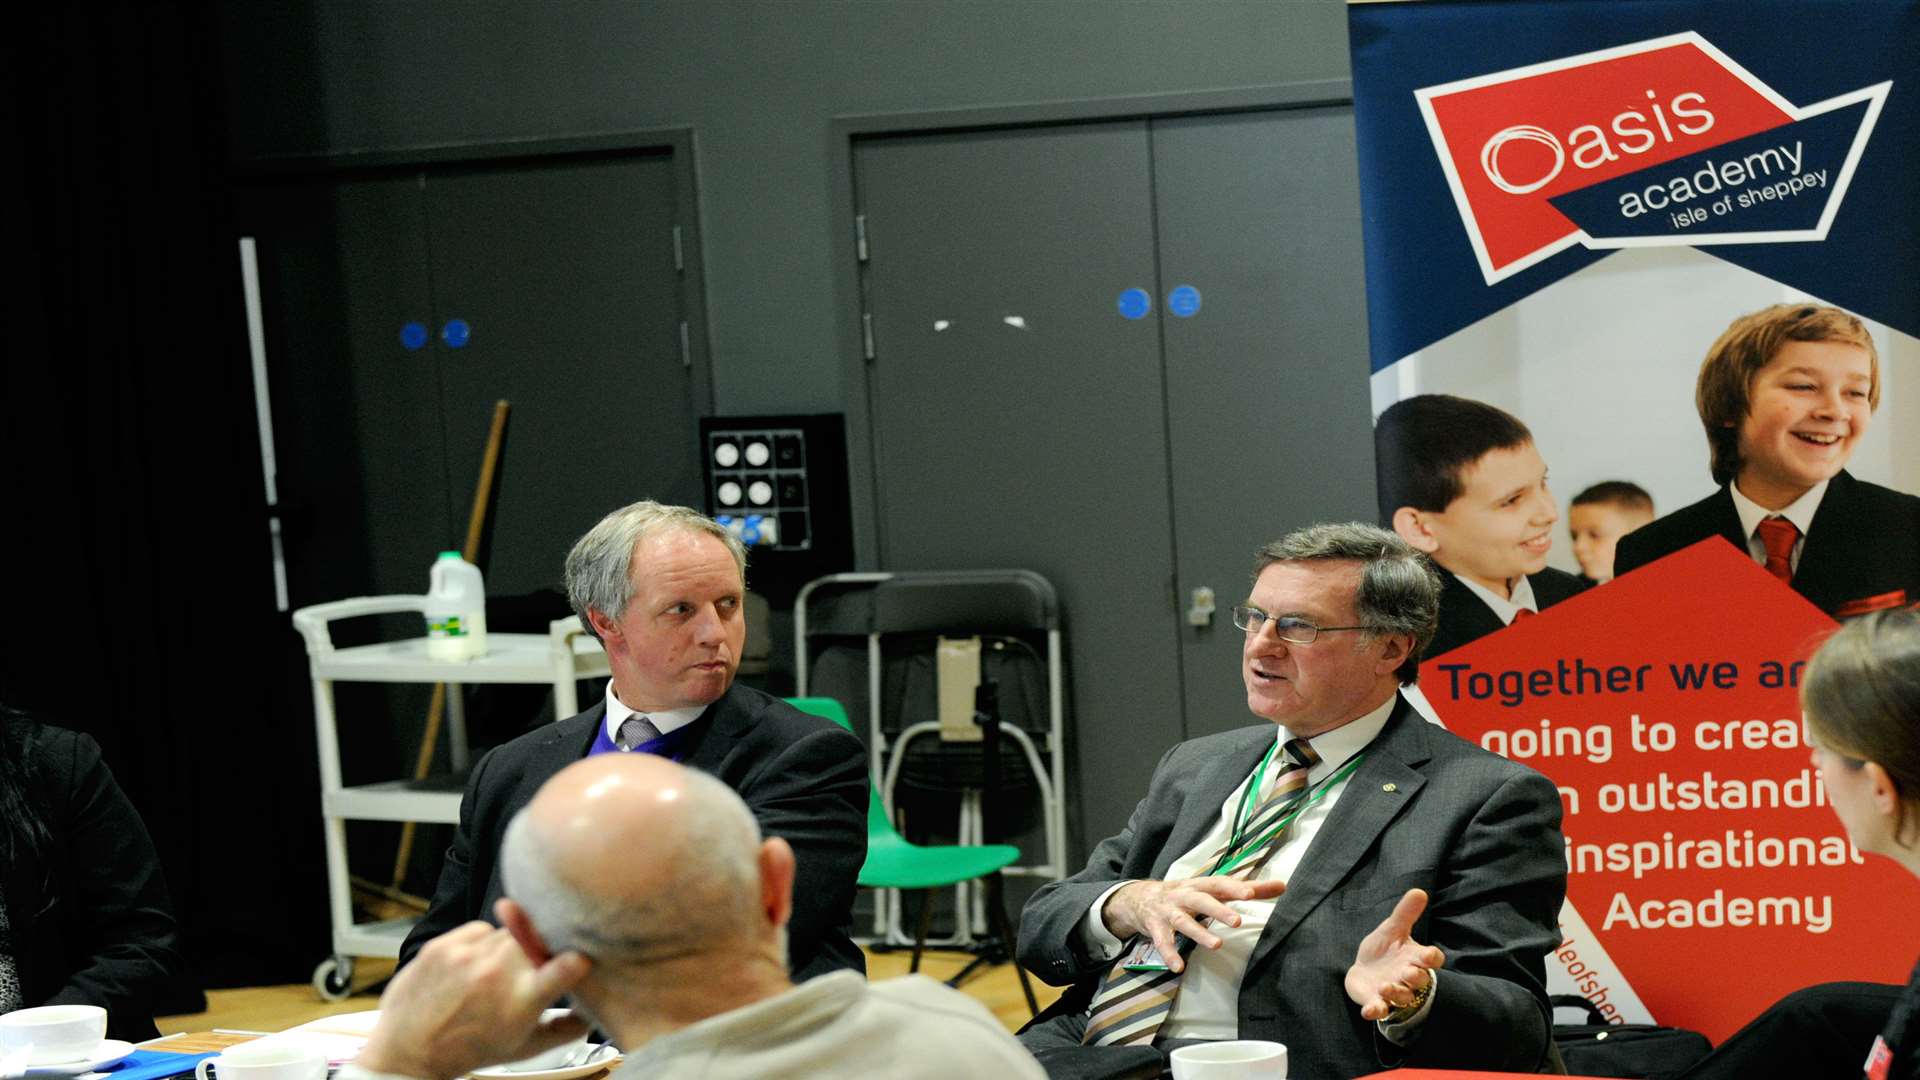 Cllr Ken Pugh (centre) makes a point during discussions at the academy